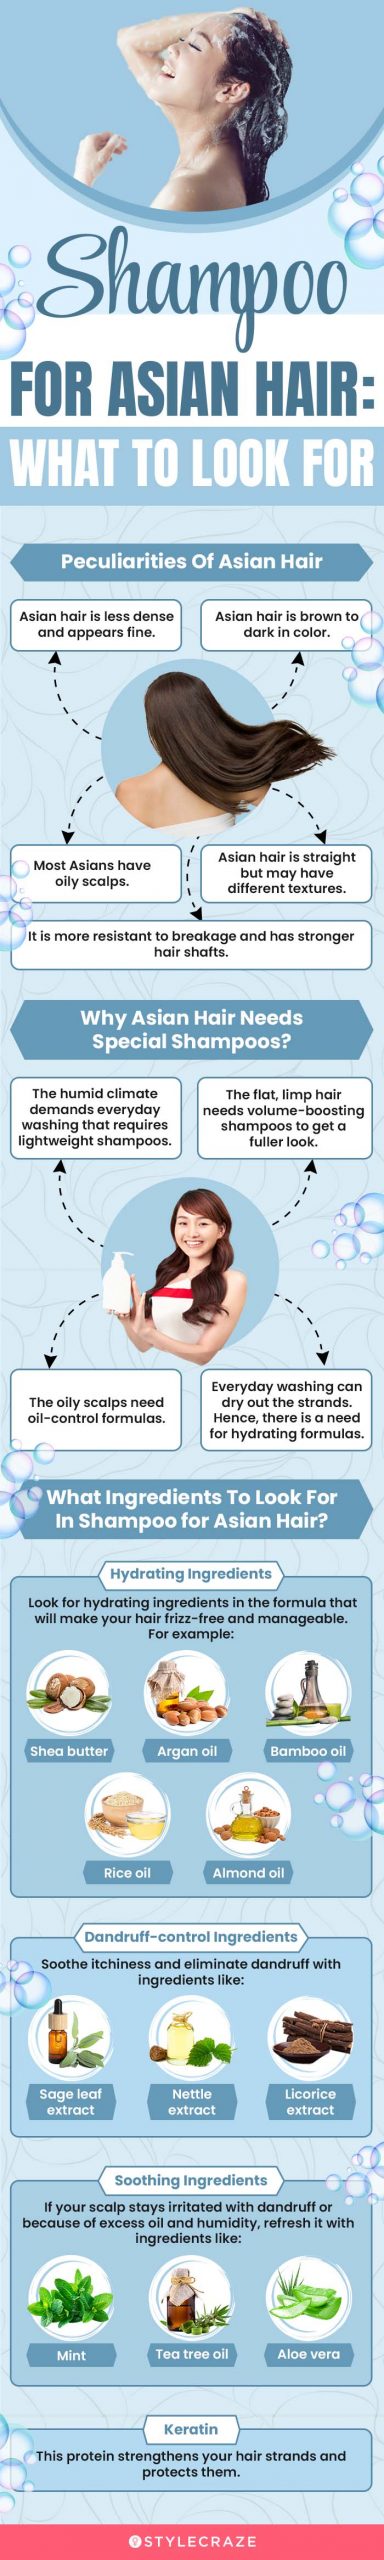 Shampoo For Asian Hair: What To Look For (infographic)